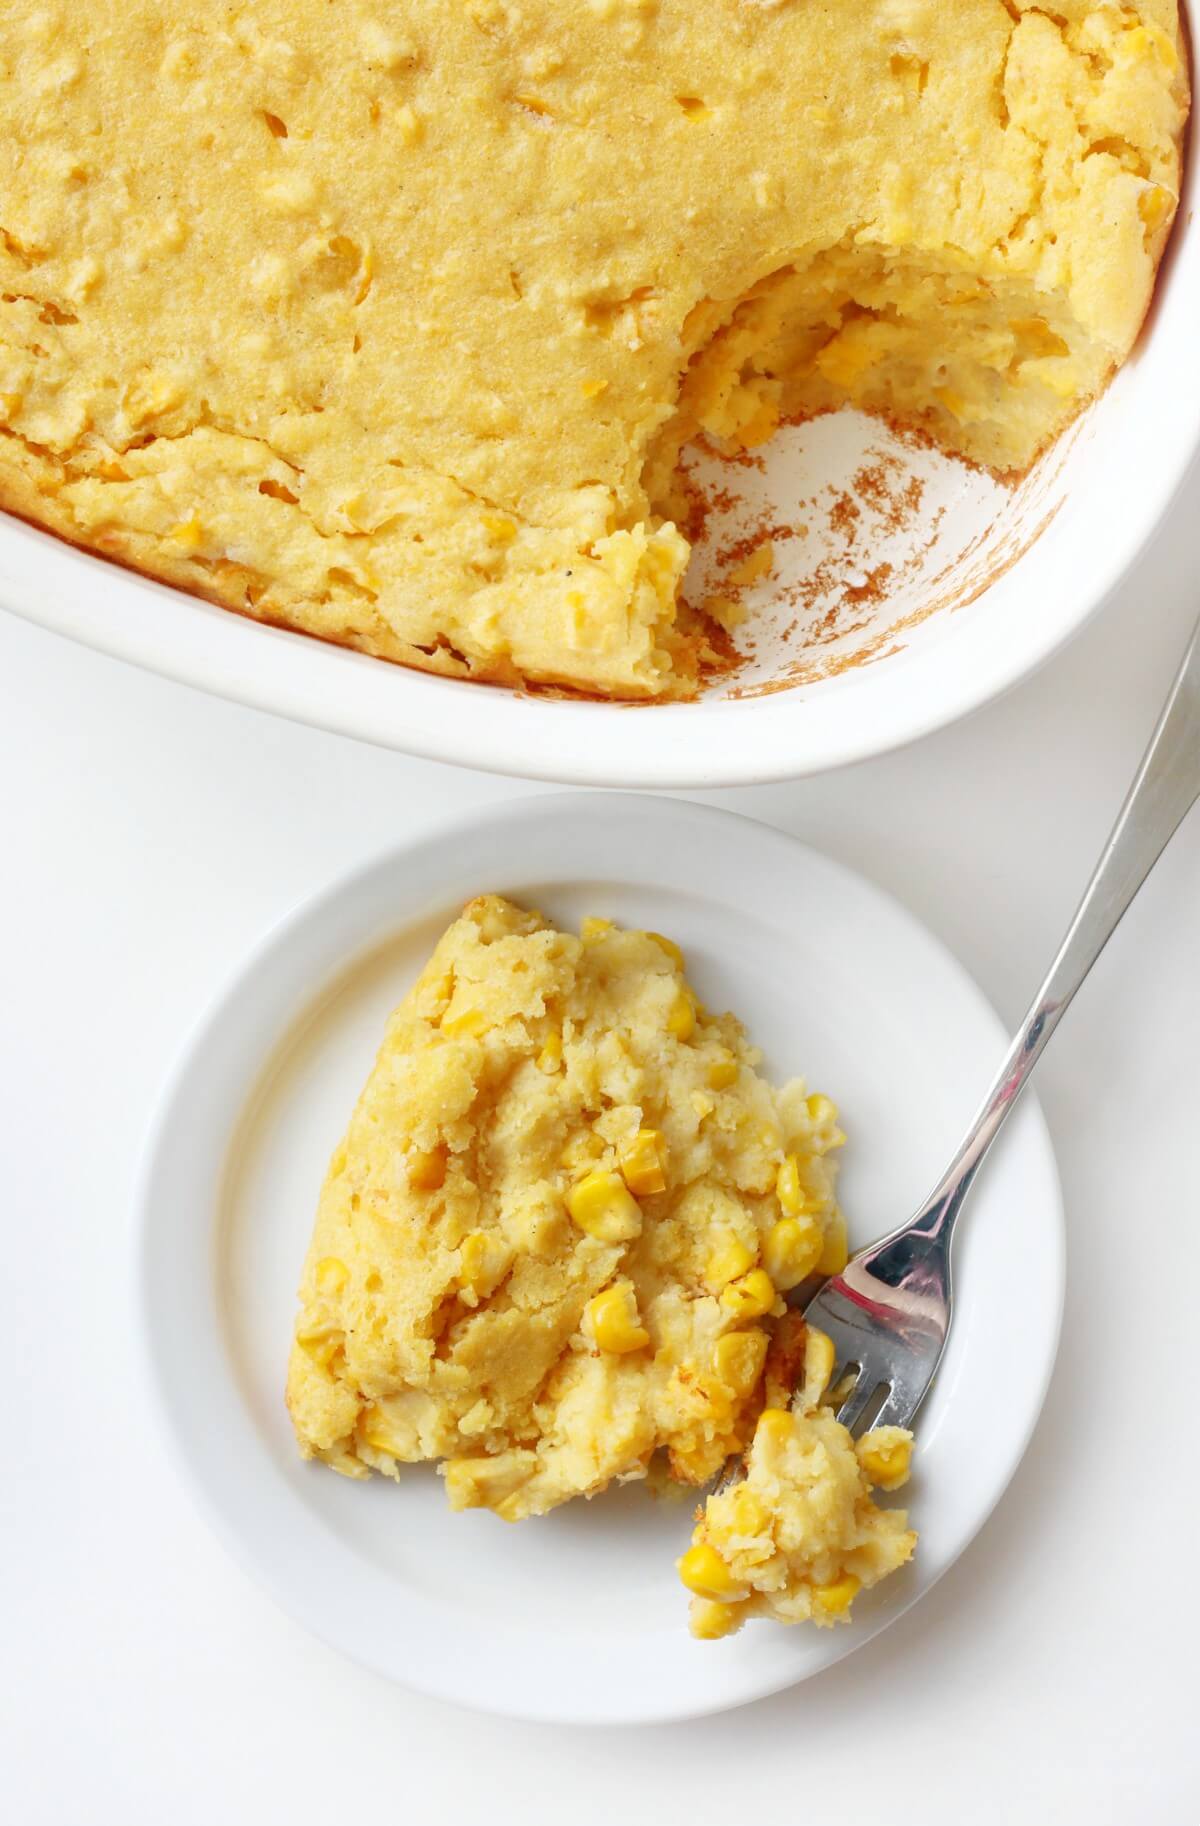 scooped out vegan corn casserole and serving on plate with fork bite